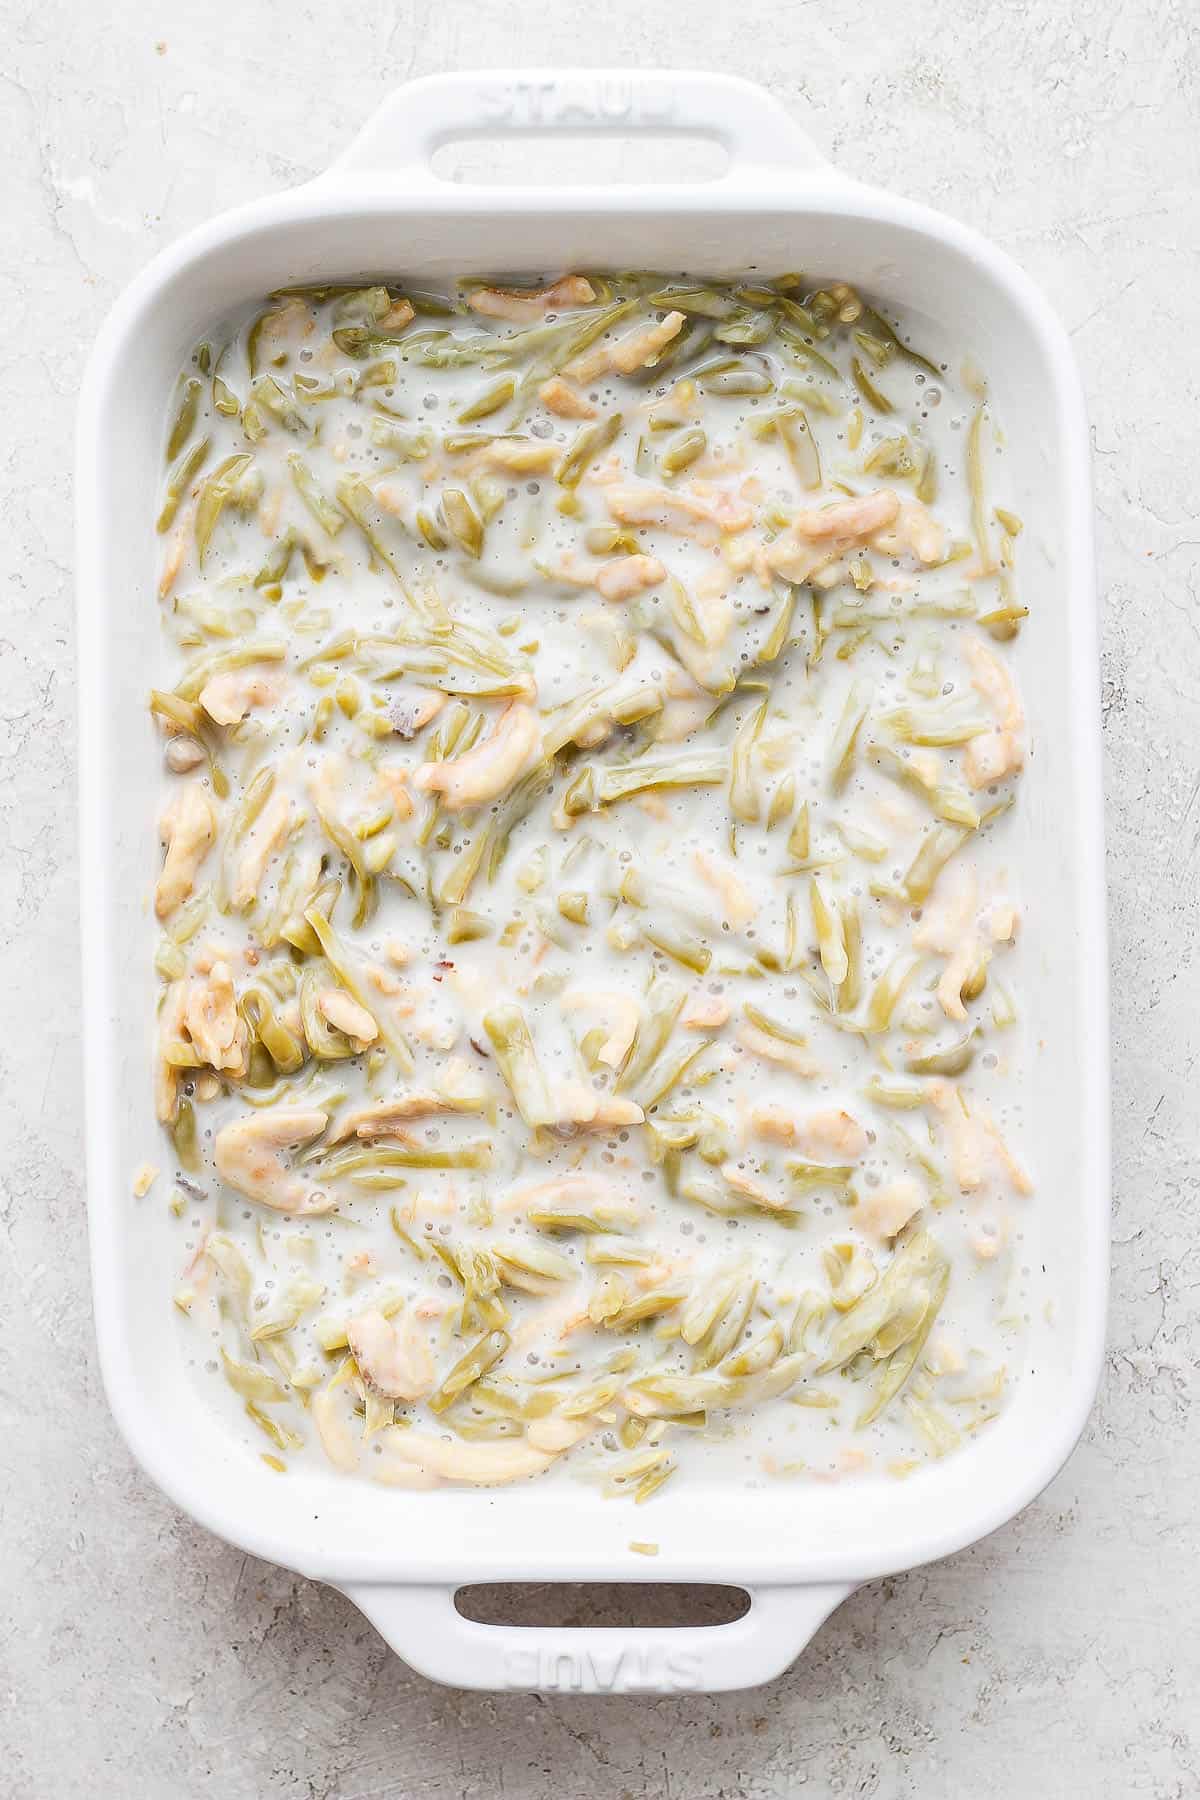 The green bean casserole fully mixed together before baking.